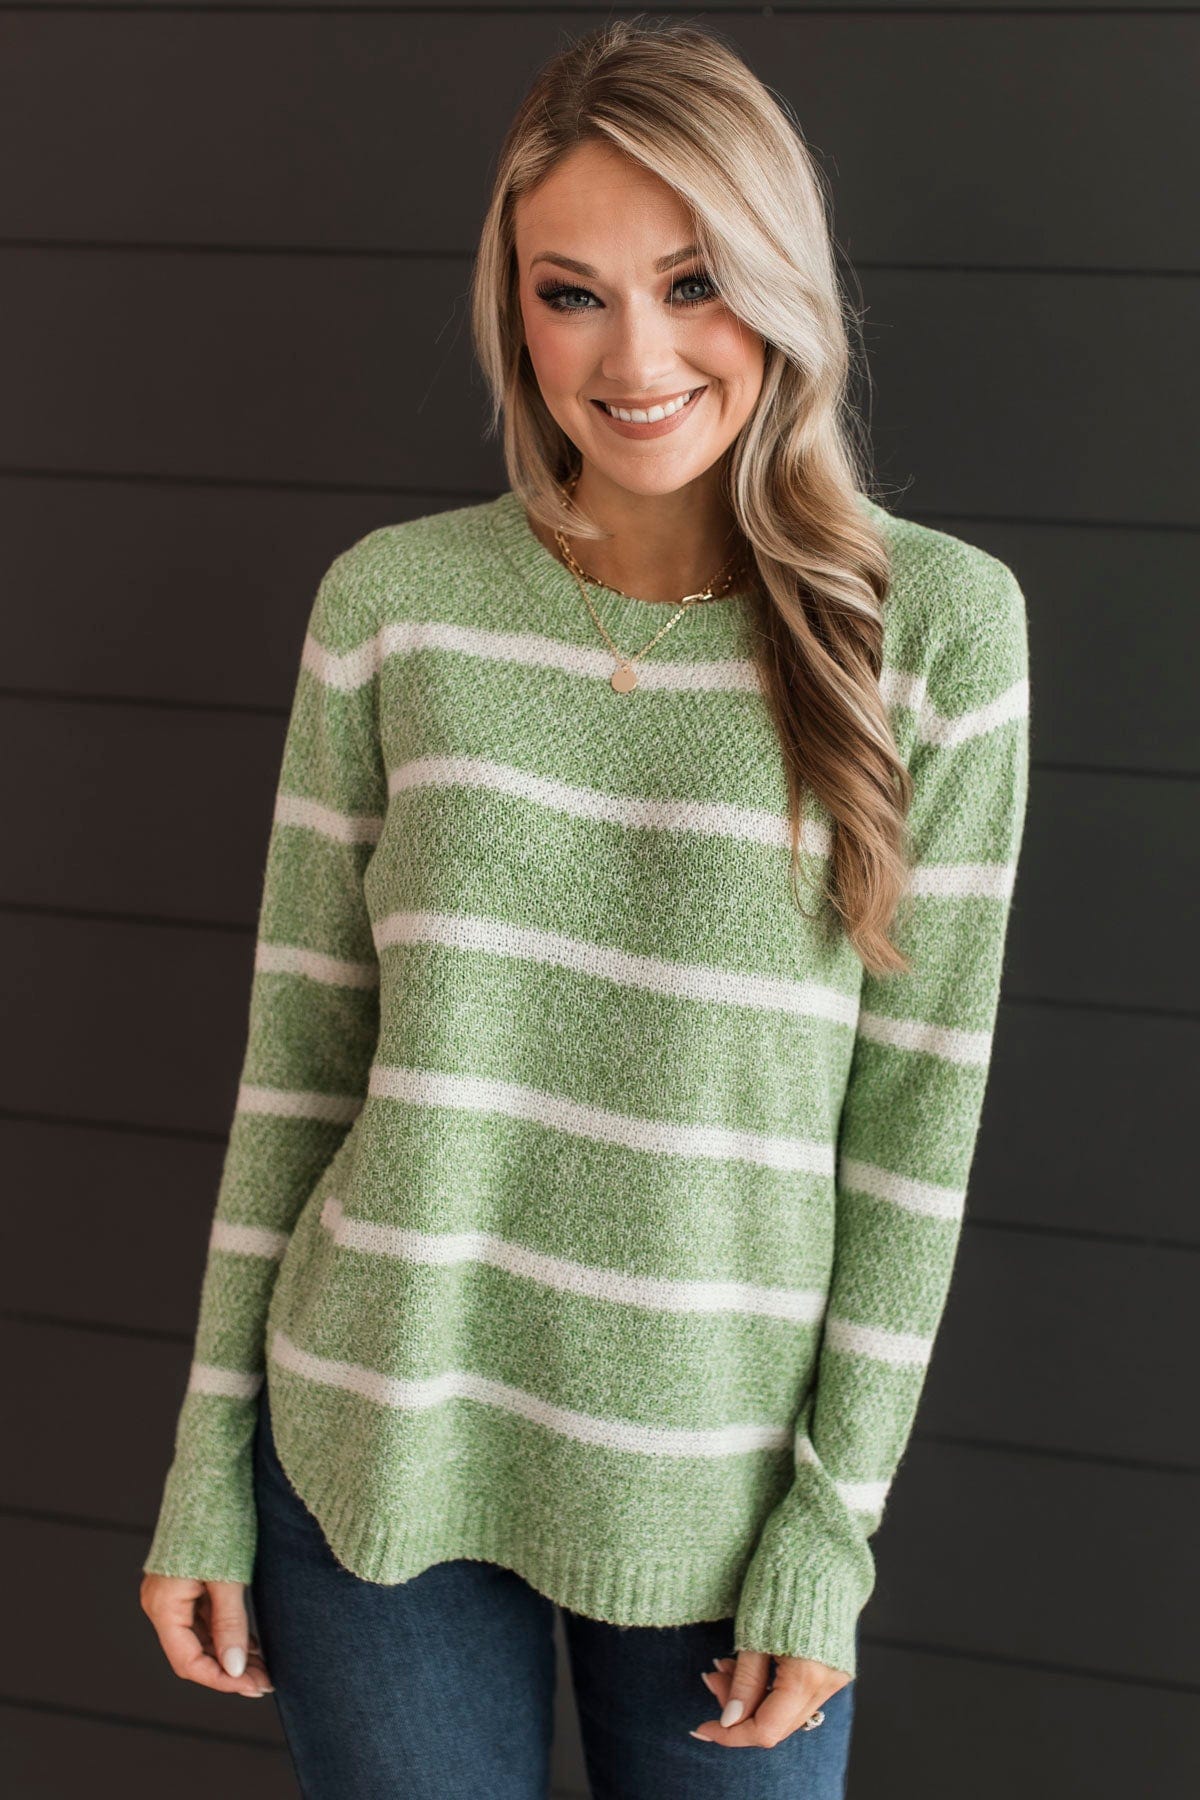 Way Of Life Striped Knit Sweater- Green & Ivory